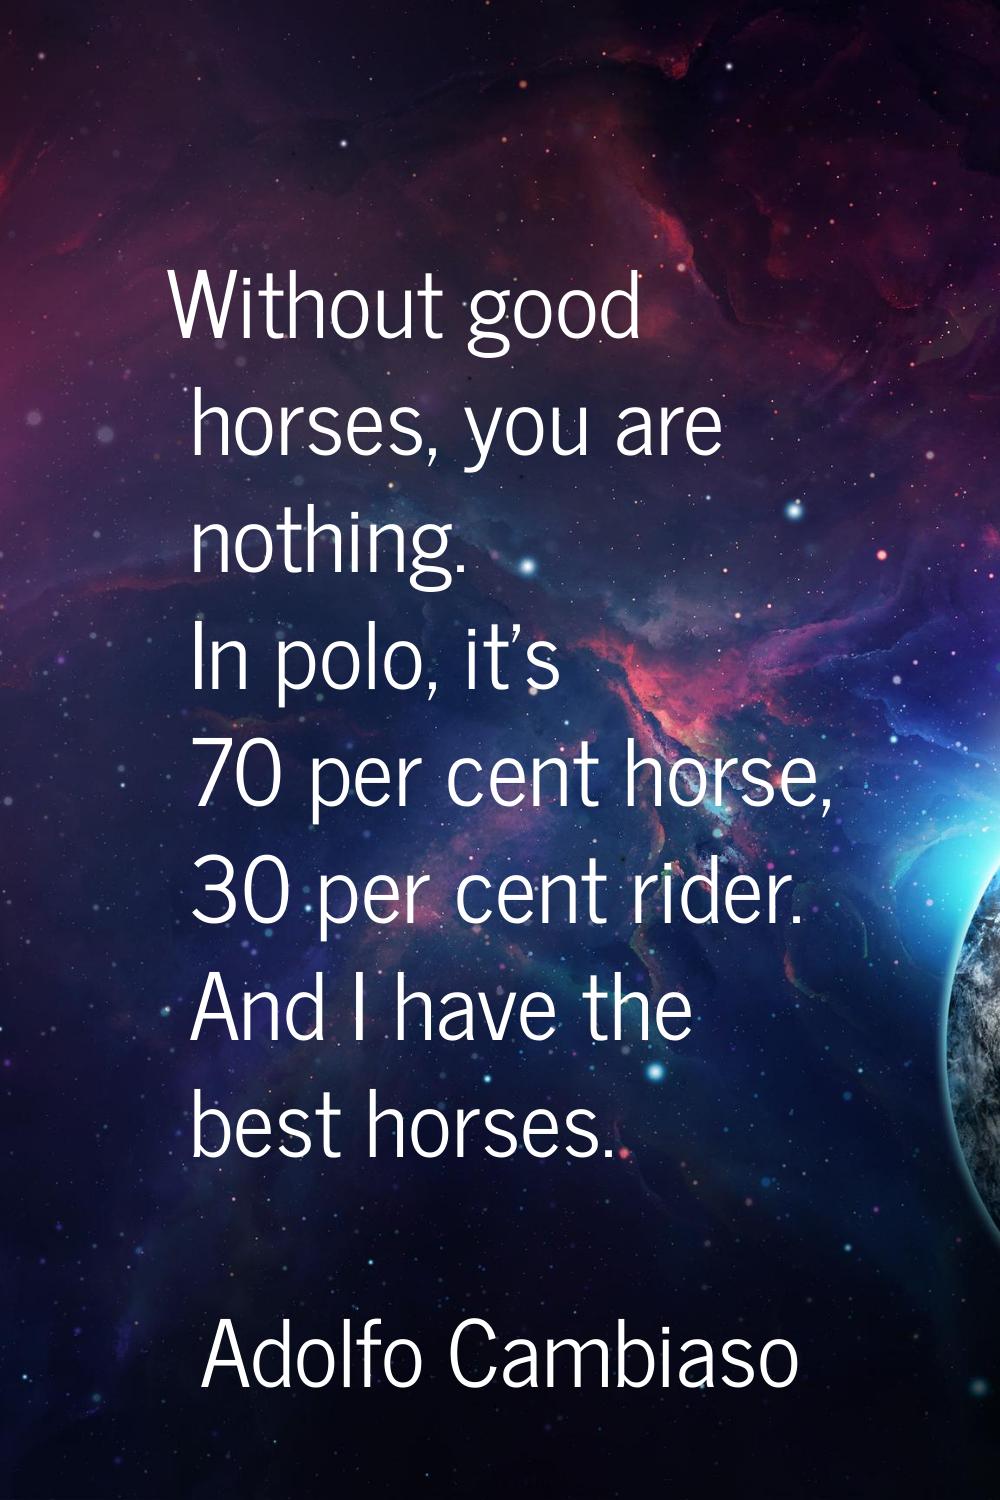 Without good horses, you are nothing. In polo, it's 70 per cent horse, 30 per cent rider. And I hav